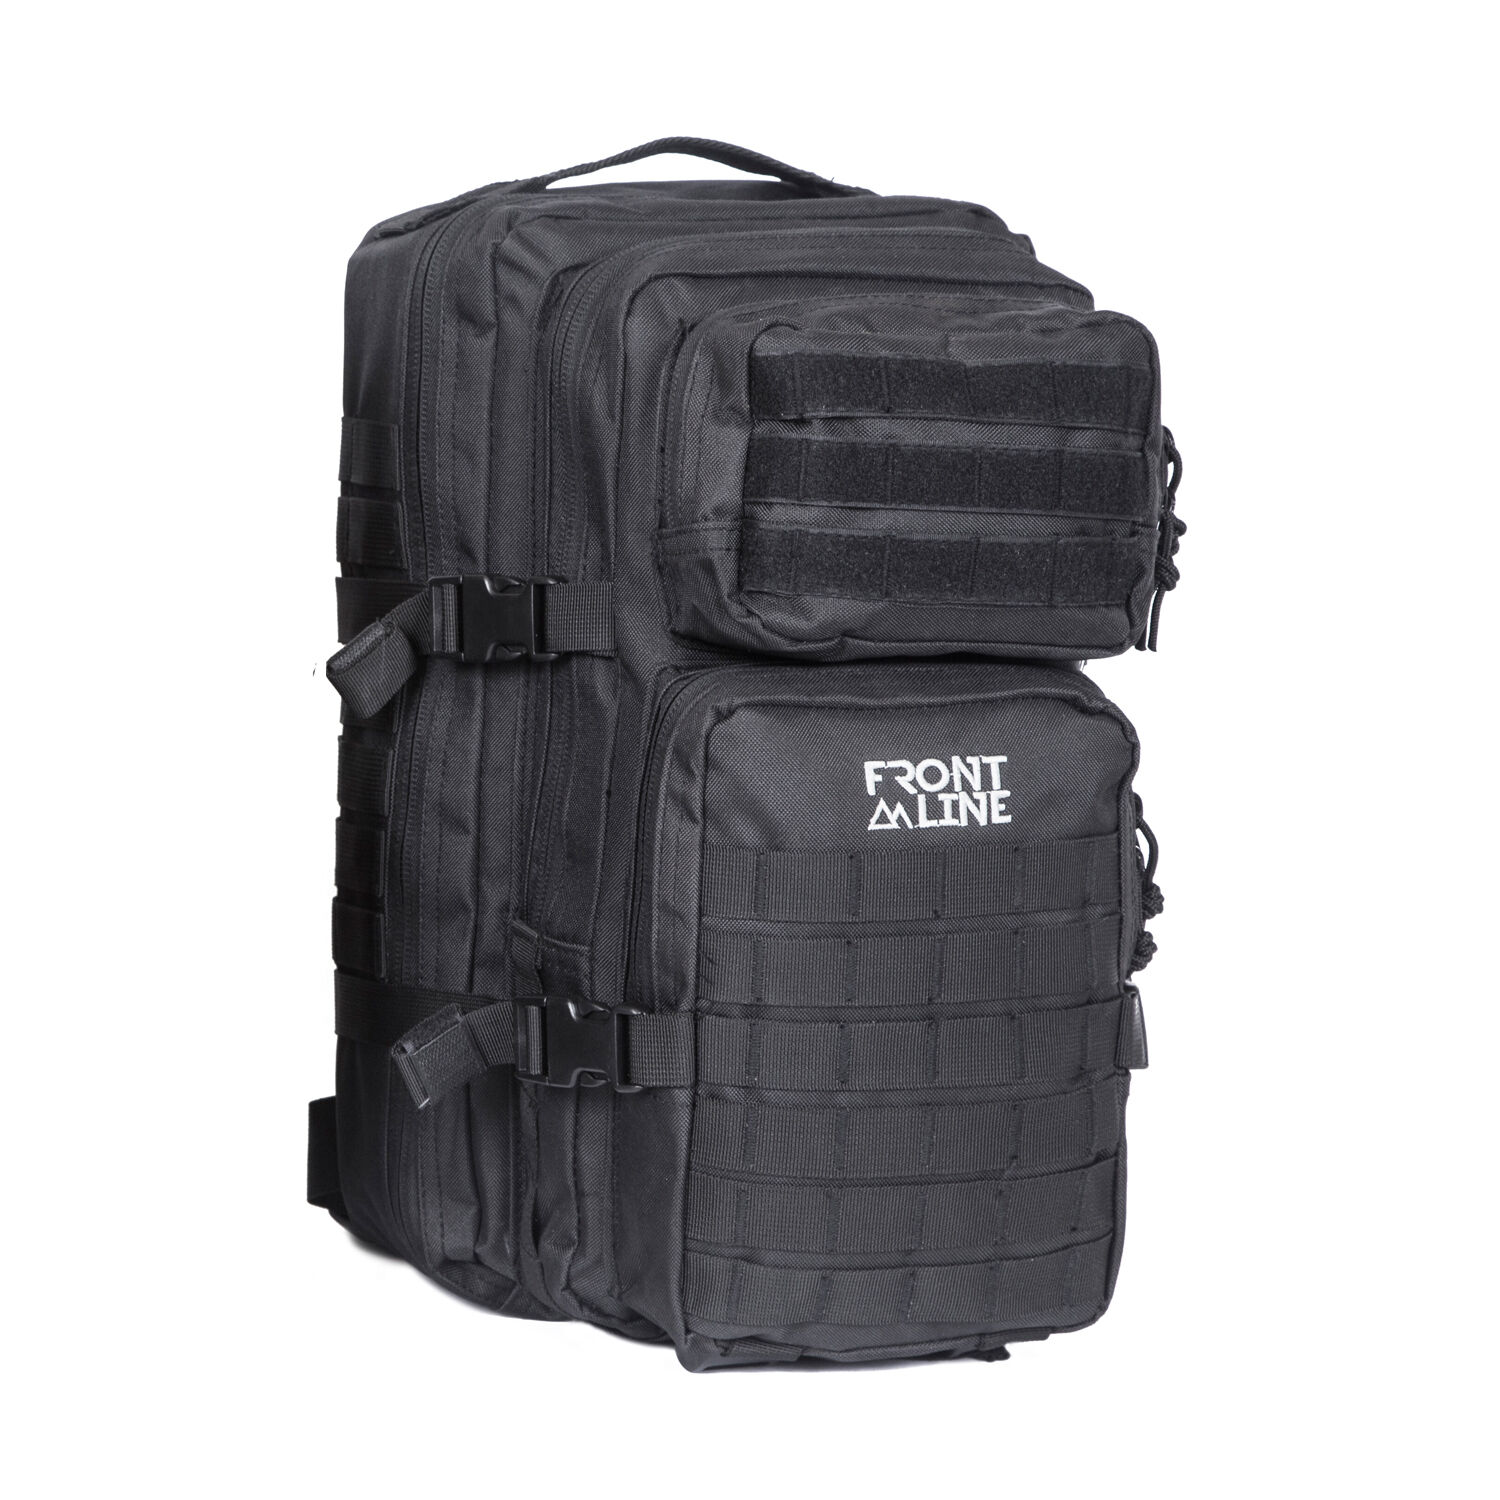 Front-Line 28L Tactical Molle Back Pack for Every Day Carry - Tavor 2 Bag